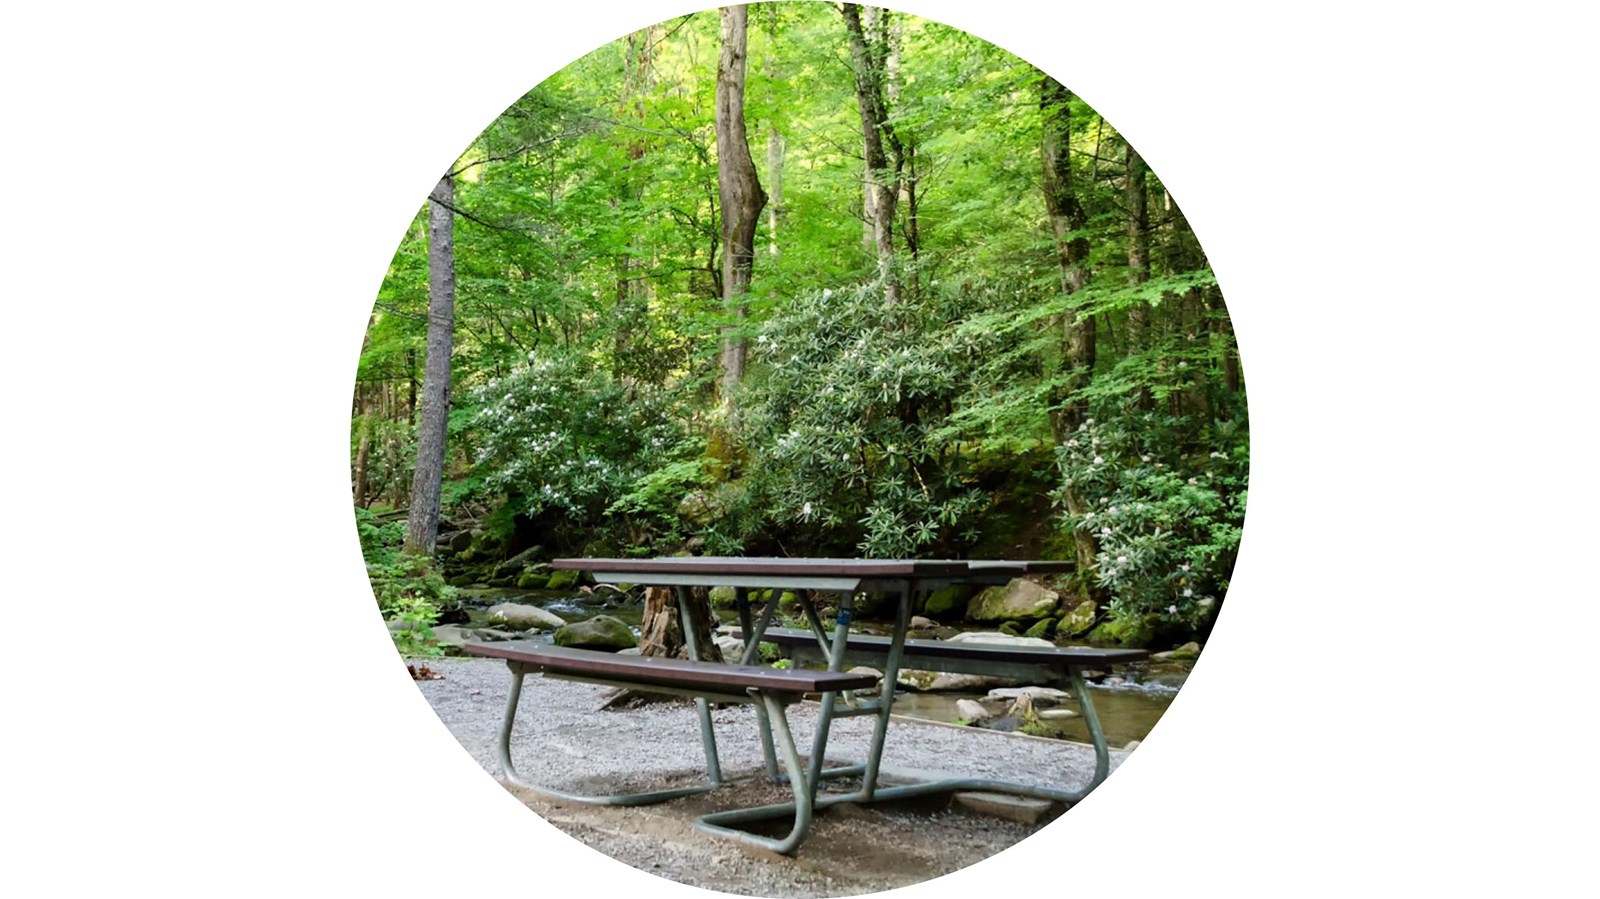 A wooden picnic table with a metal frame sitting on a gravel pad near a grill surrounded by trees.